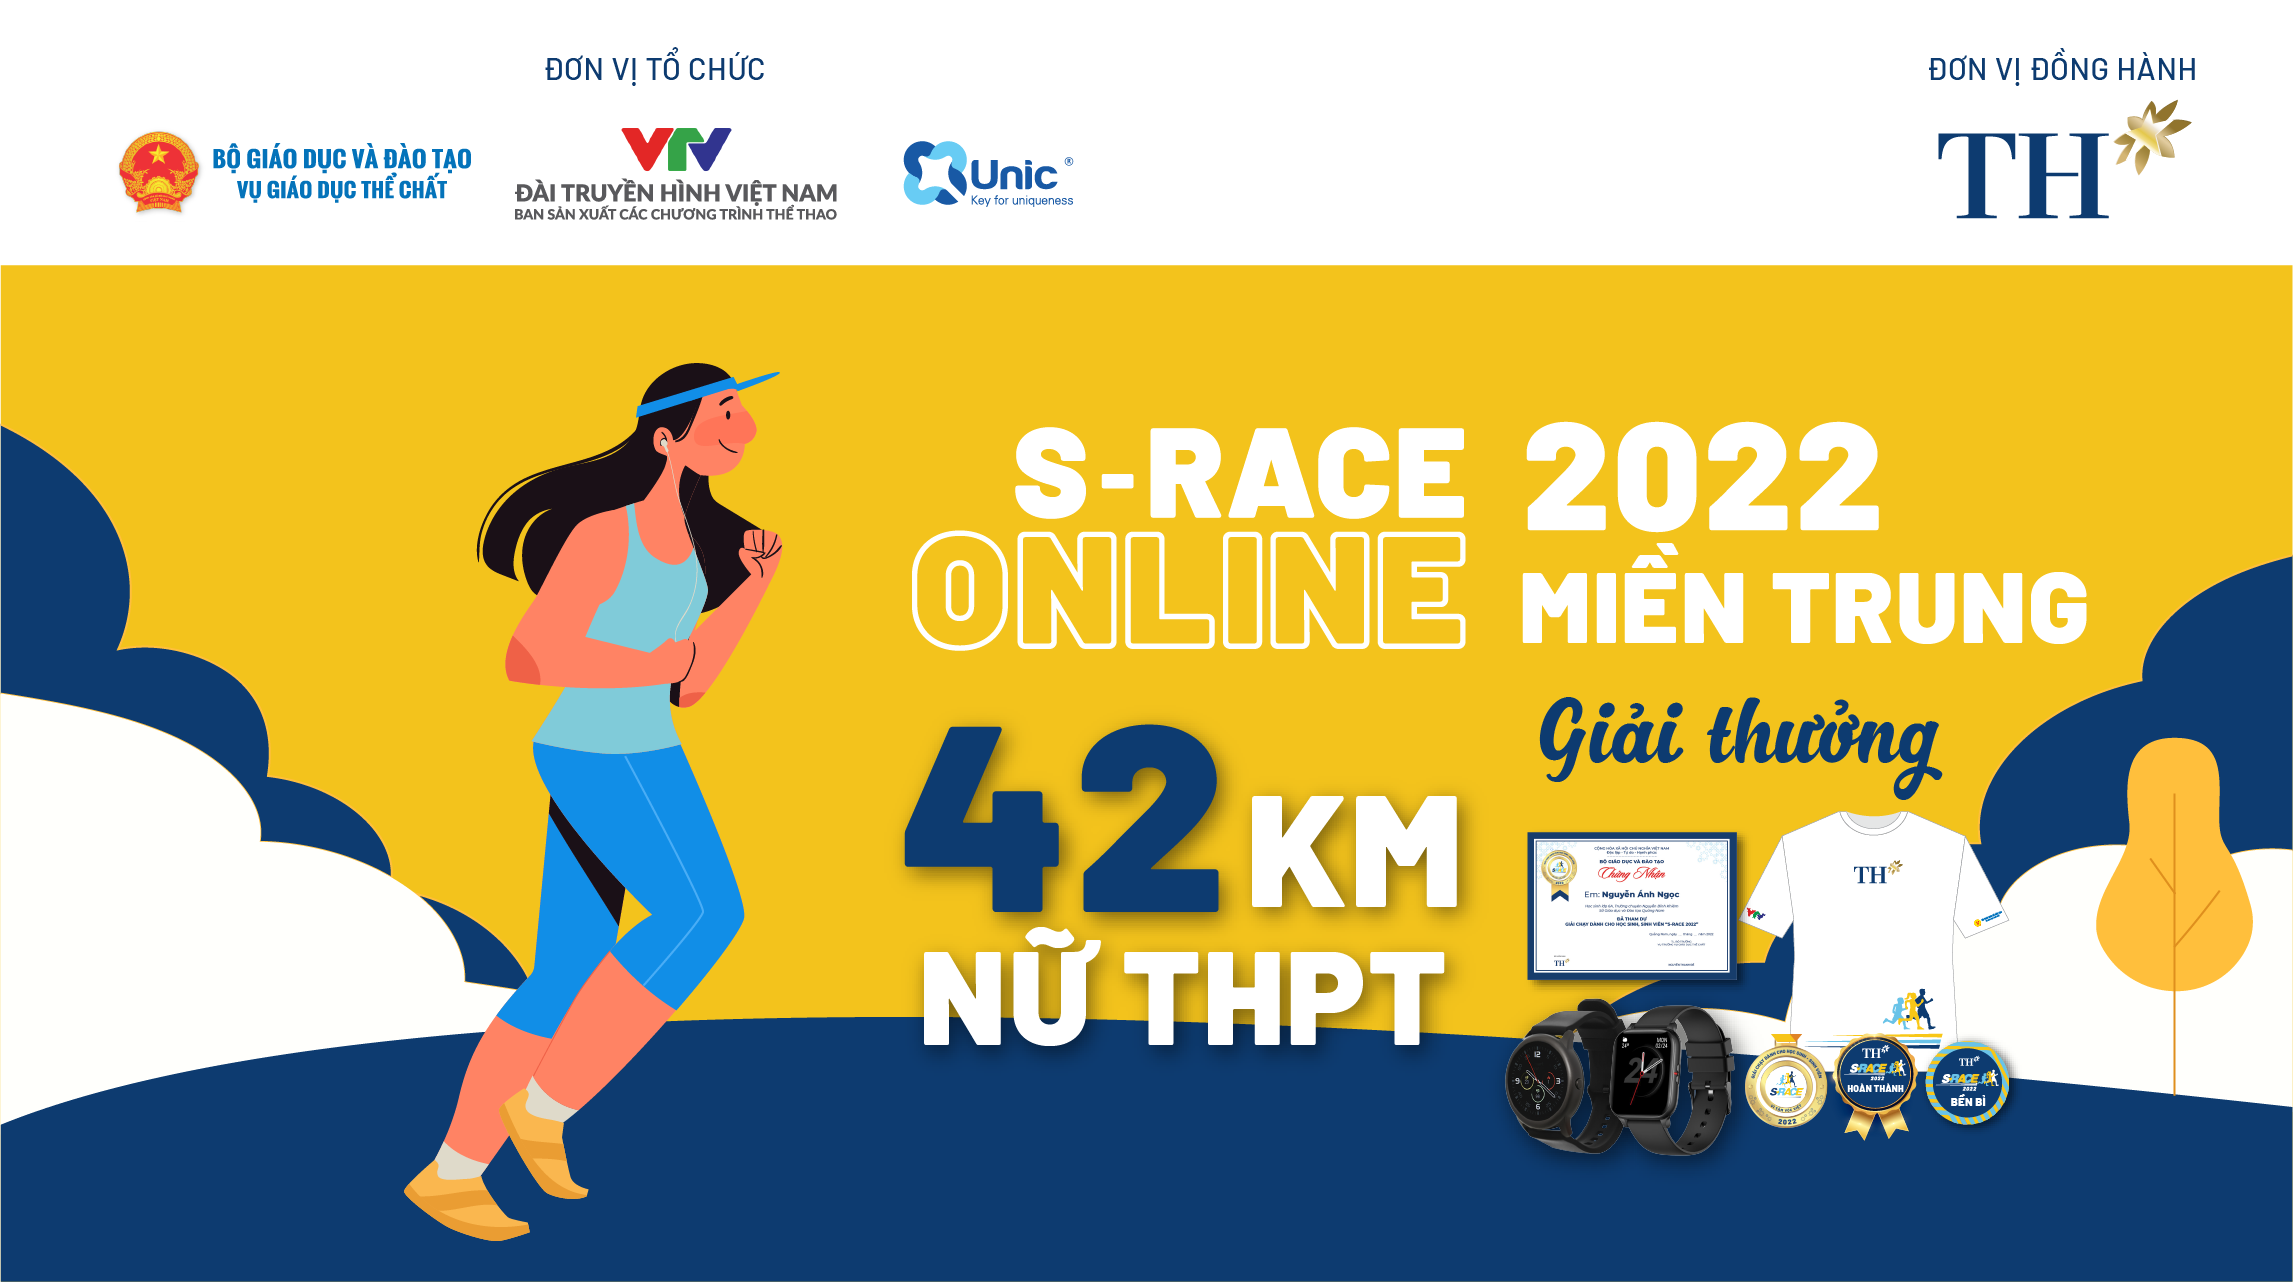 42 KM NỮ THPT (S-Race Online miền Trung) - Unlimited Chain